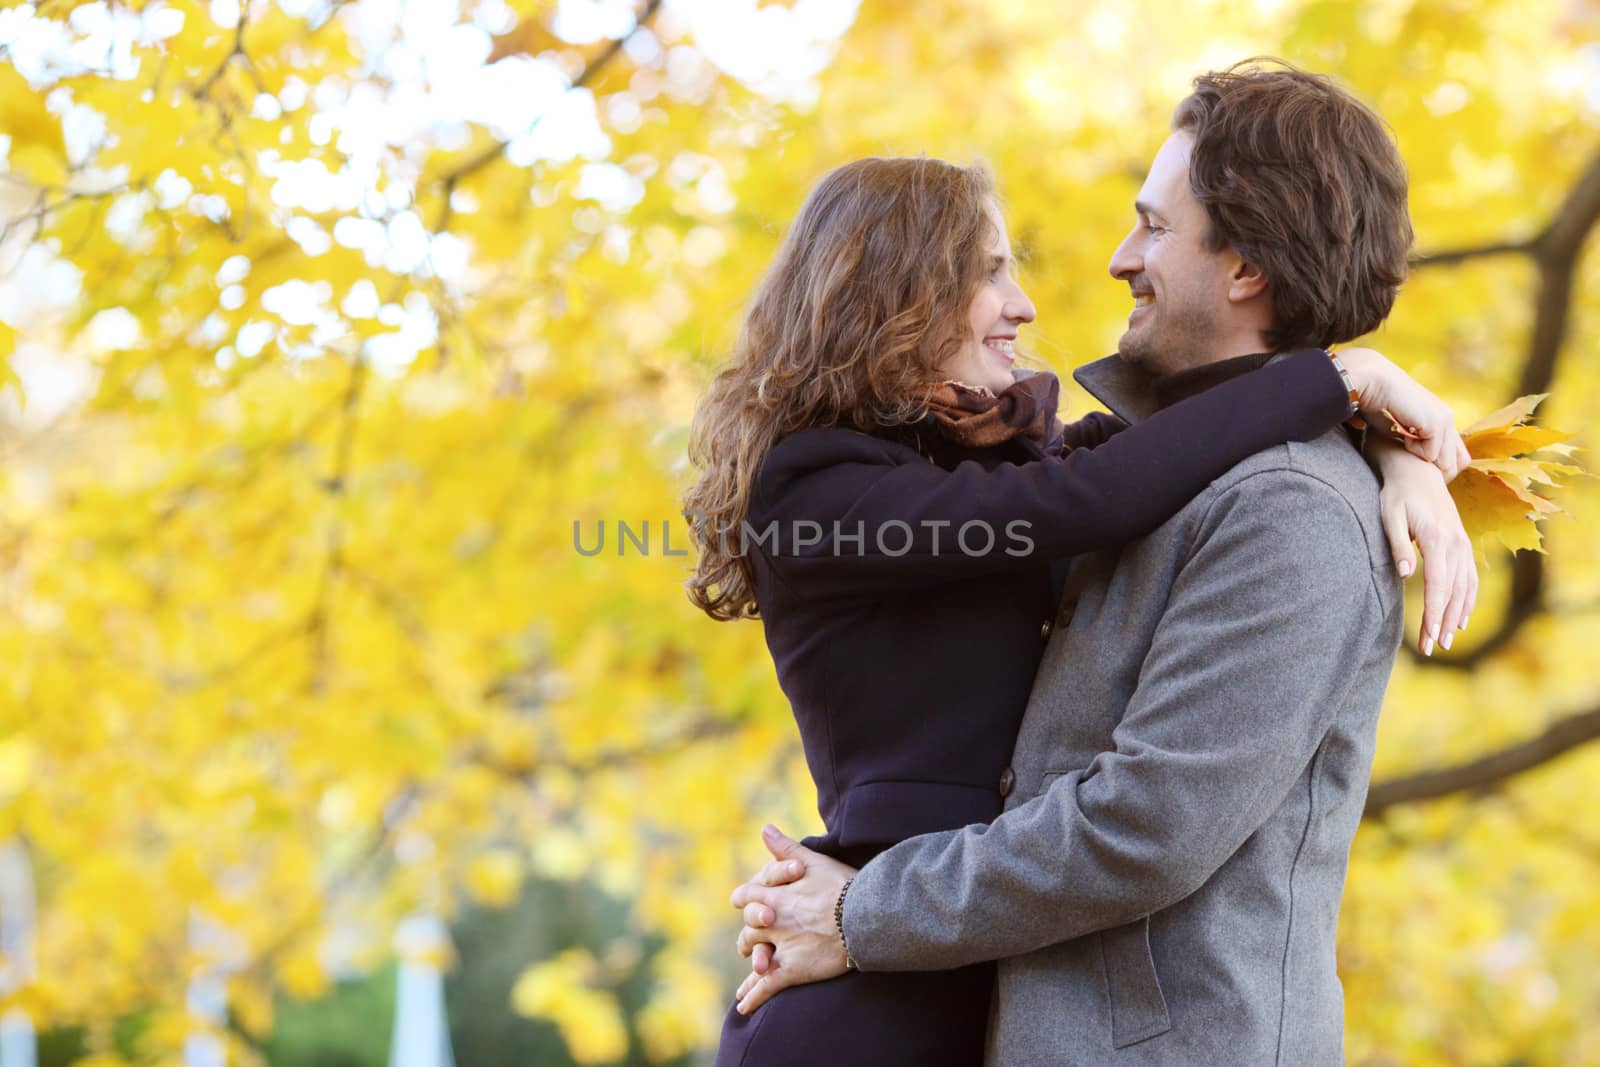 Smiling couple hugging in autumn park with yellow trees